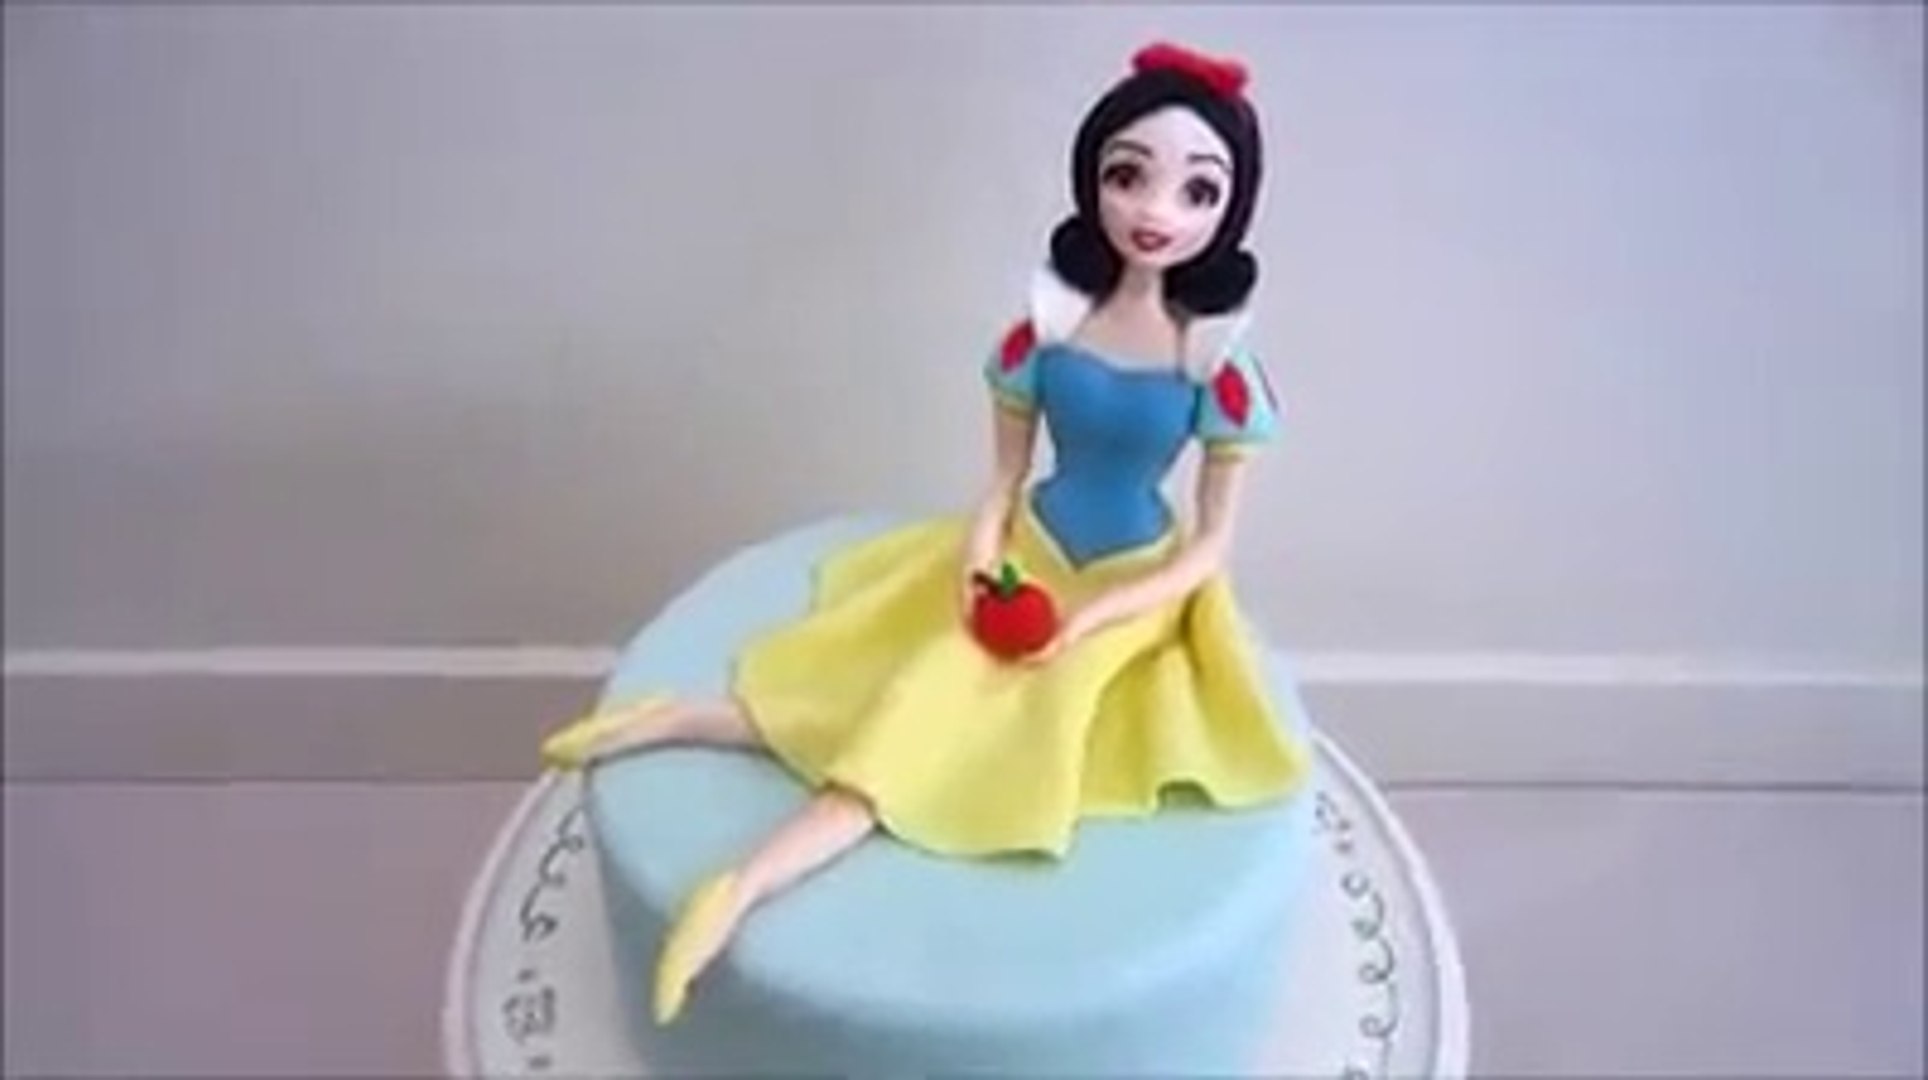 How to make Snow White princess with Play-Doh / step by step